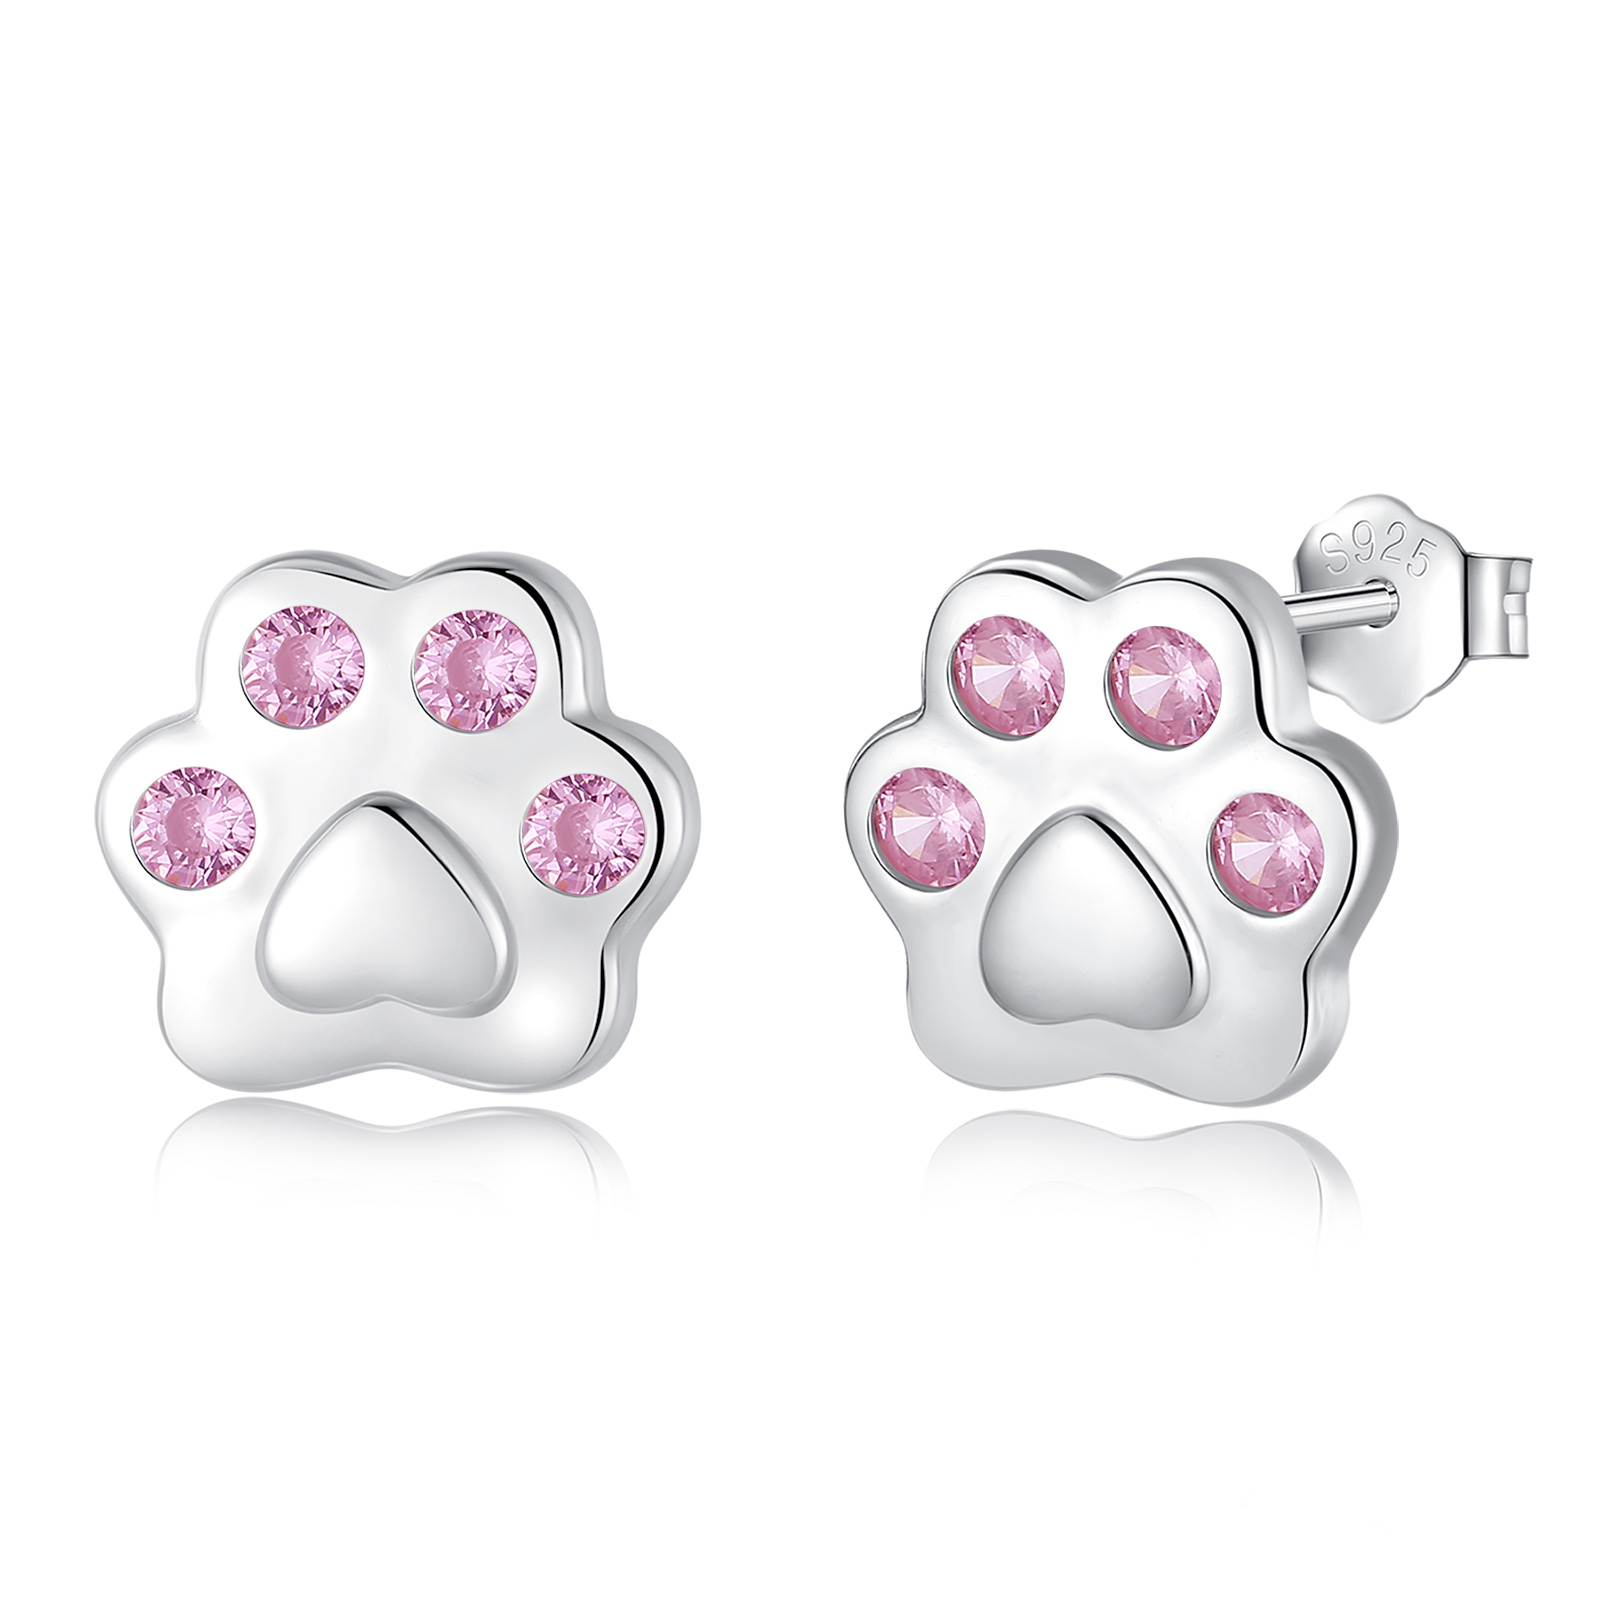 Merryshine Fashion Fine Jewelry 925 Sterling Silver Pink Cubic Zirconia Cute Dog Paw Print Stud Earrings for Girls